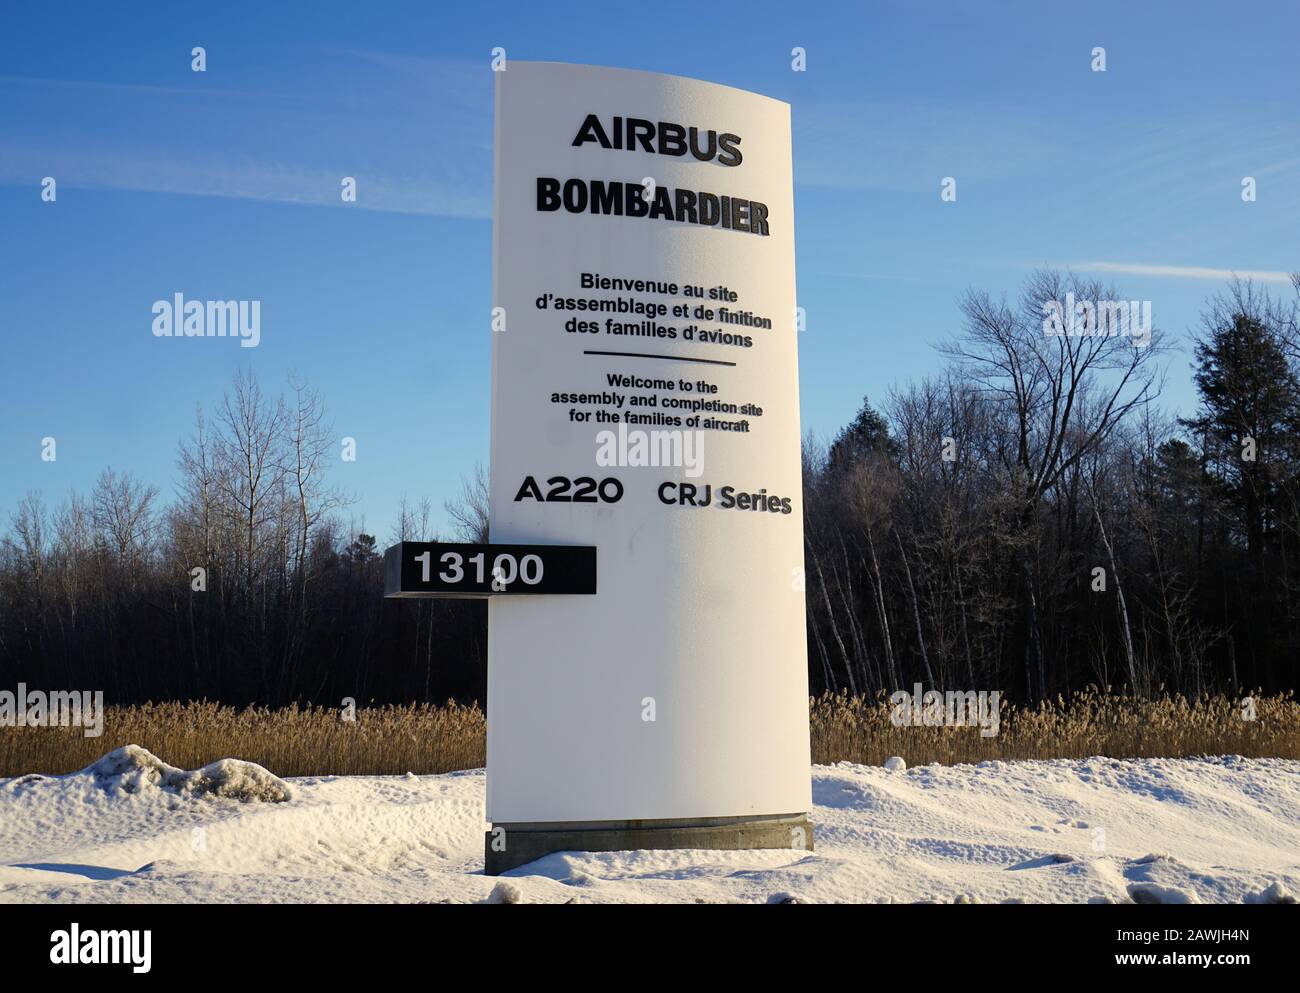 Mirabel,Quebec,Canada,January 30,2020.Airbus-Bombardier A220 aircraft assembly plant in Mirabel,Quebec,Canada.Credit:Mario Beauregard/Alamy News Stock Photo